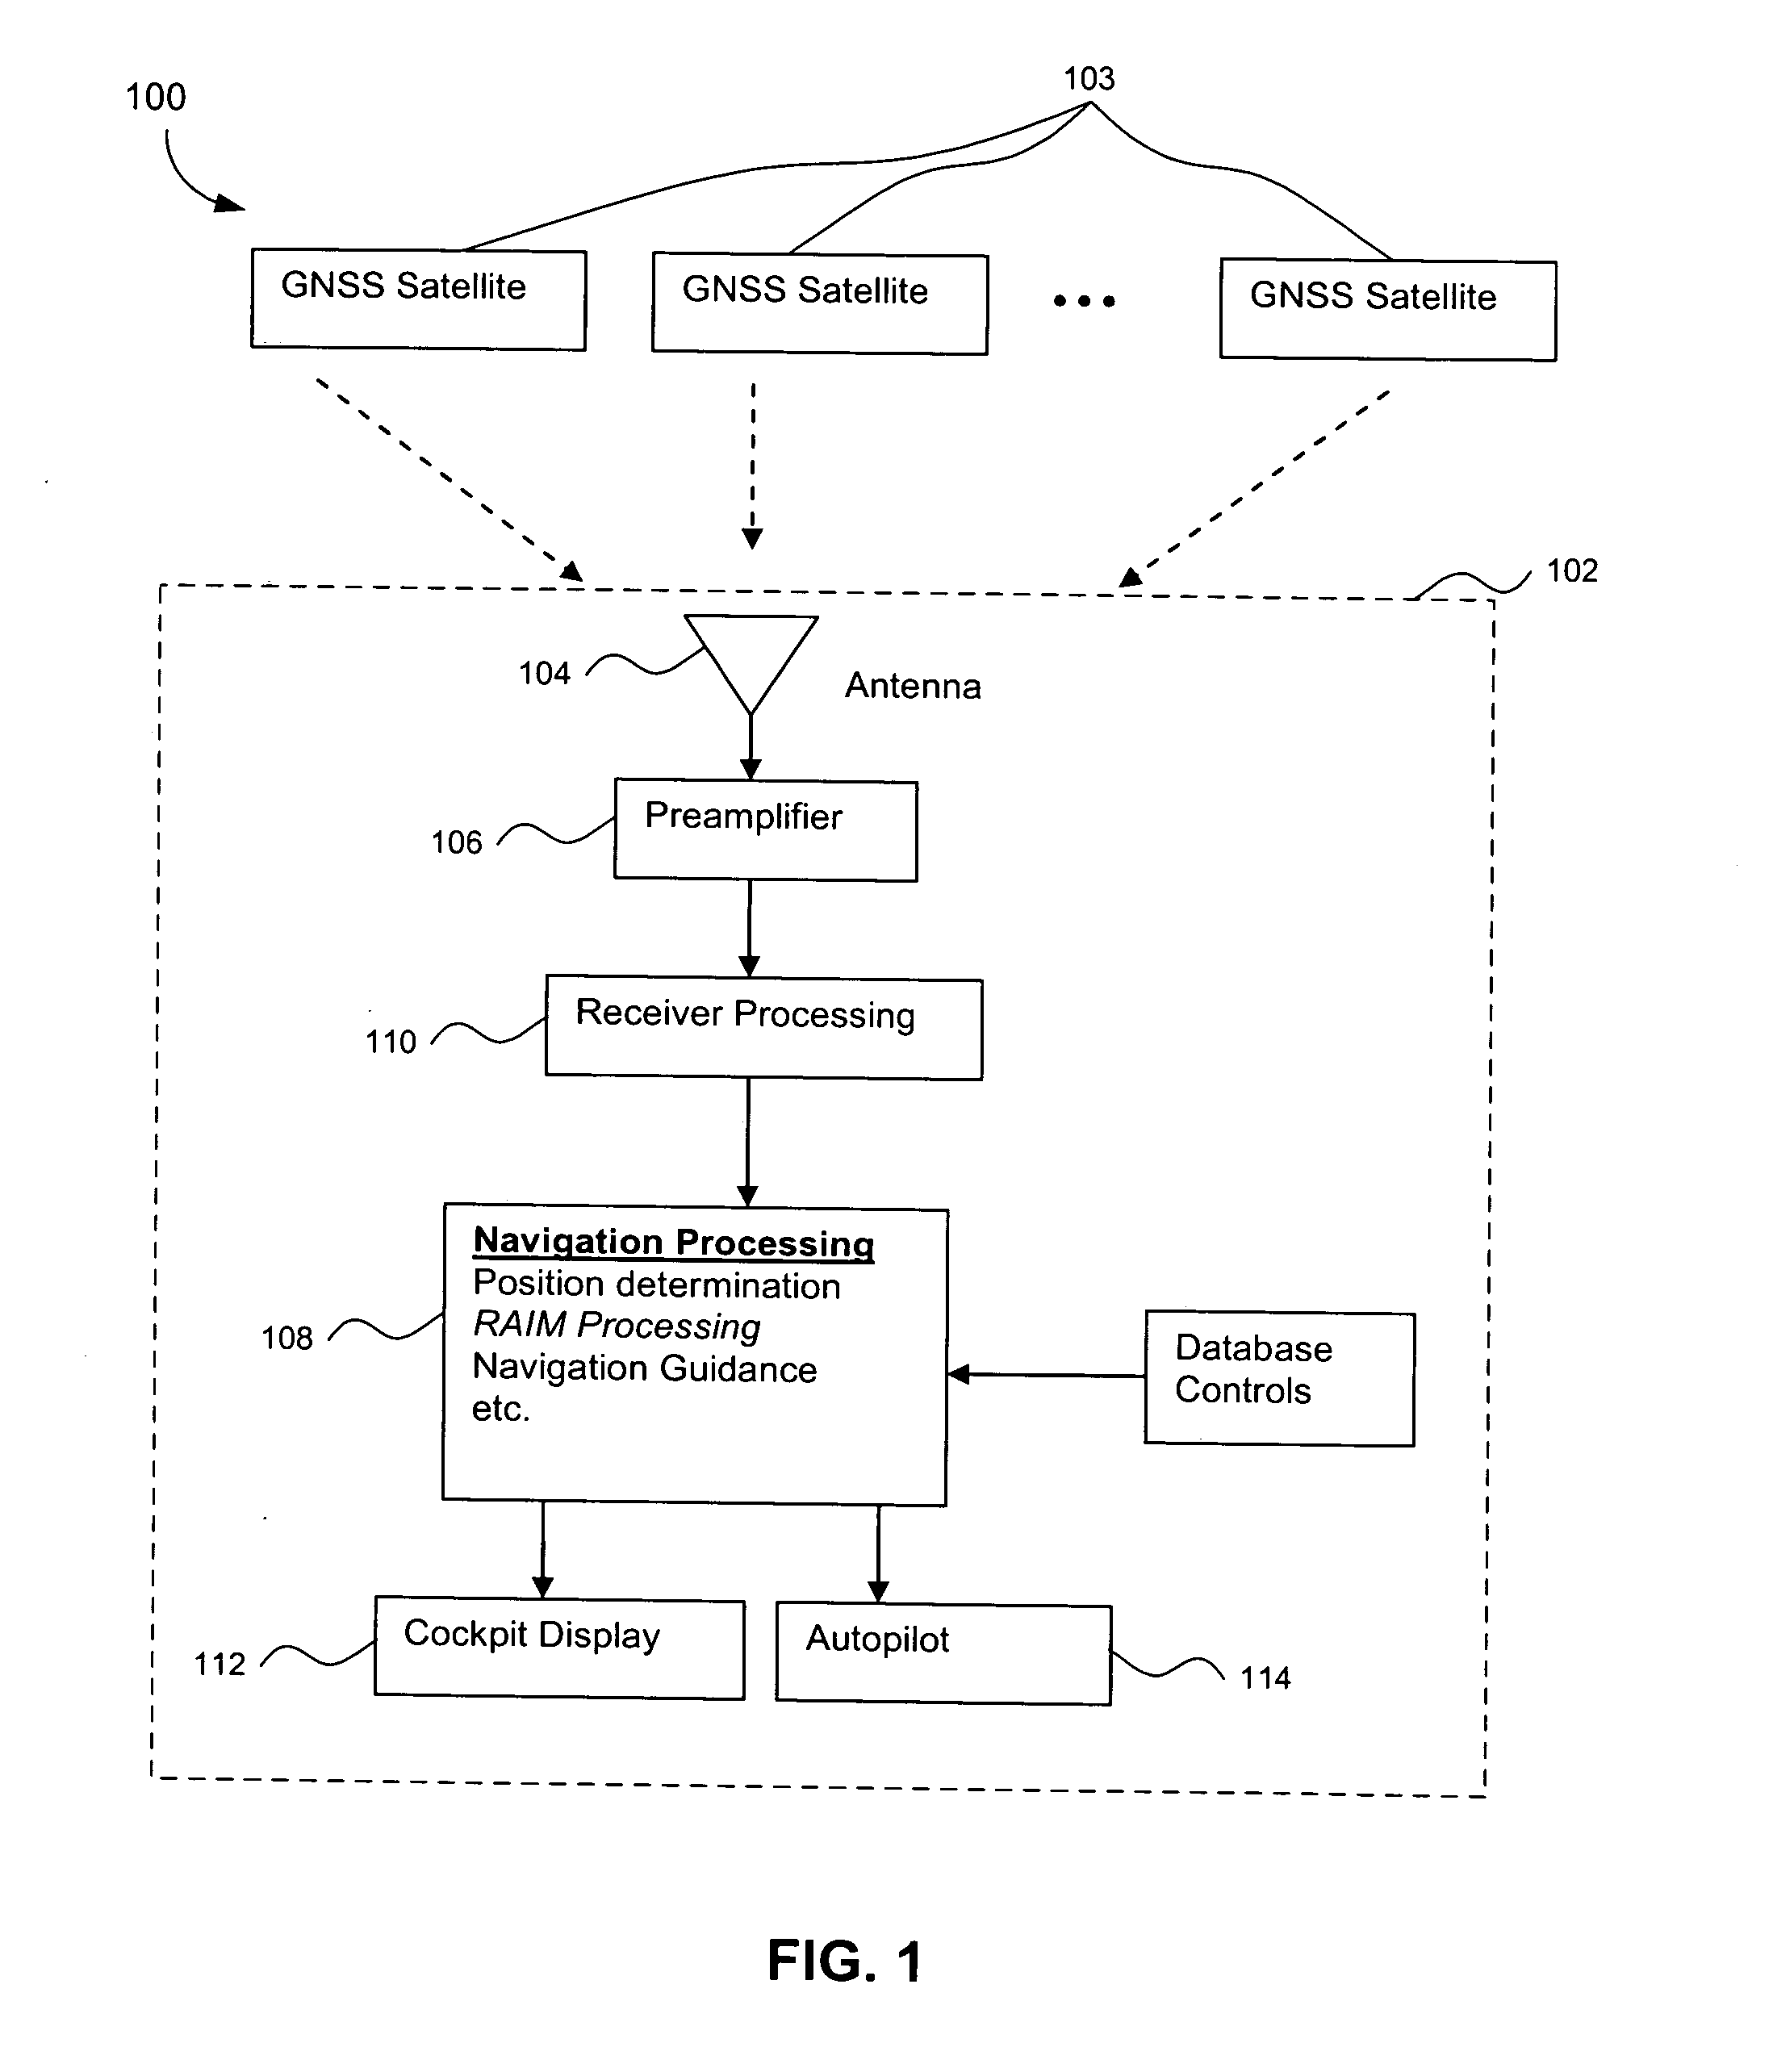 Methods and systems for mobile navigational applications using global navigation satellite systems